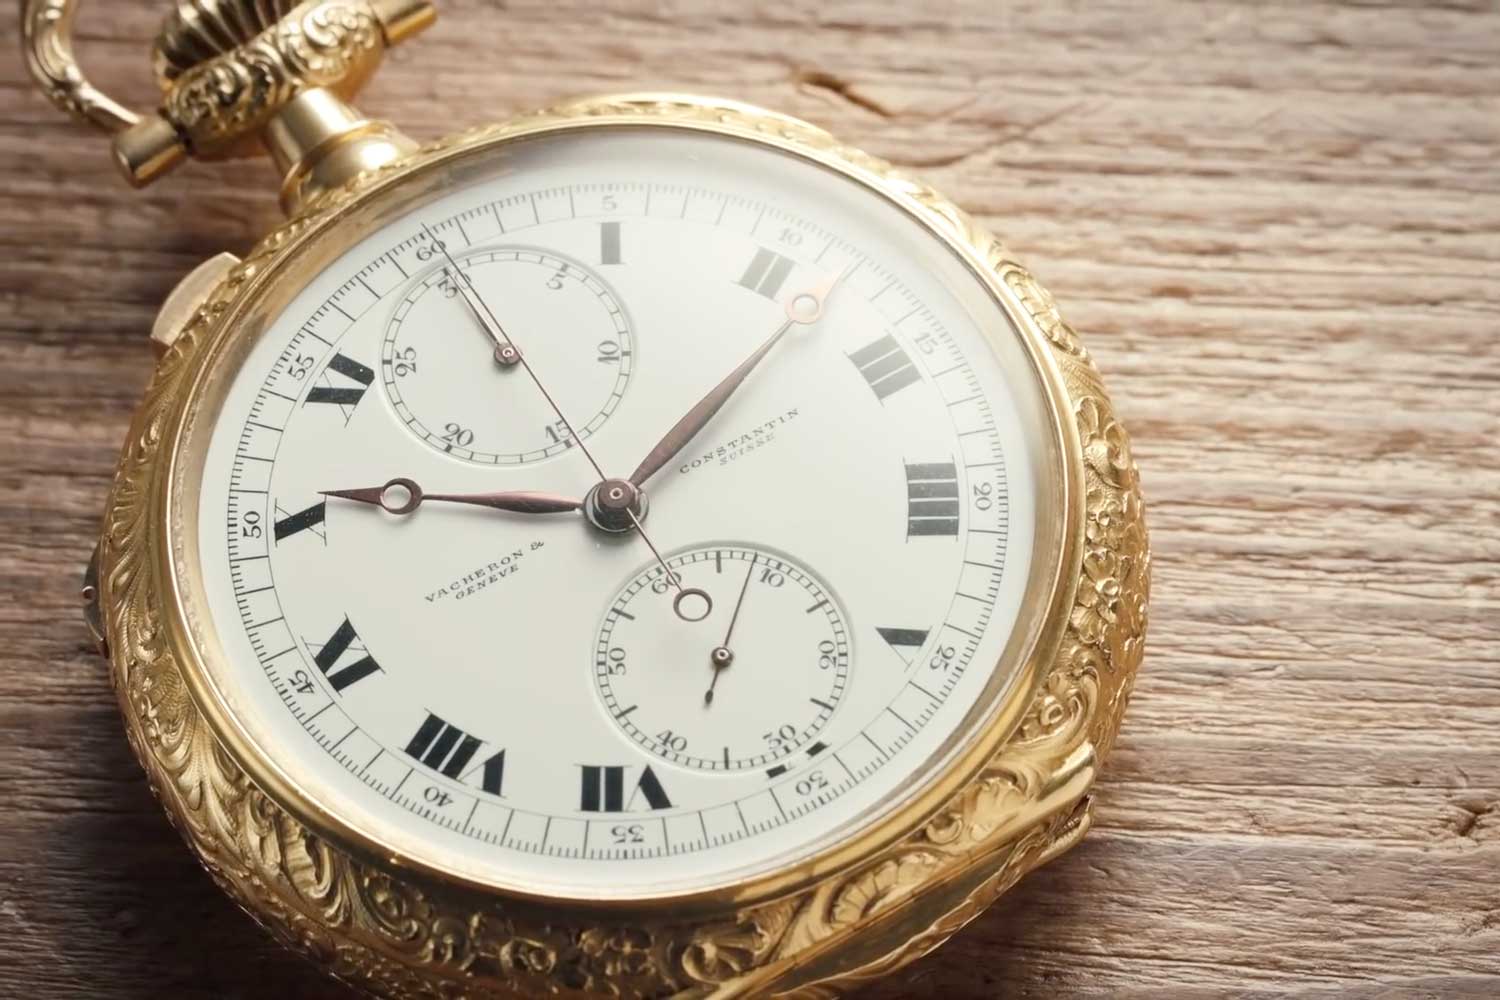 Pocket watches presented a fantastic opportunity to show off. The bigger the better! Pictured here is the Vacheron Constantin James Ward Packard Pocket Watch